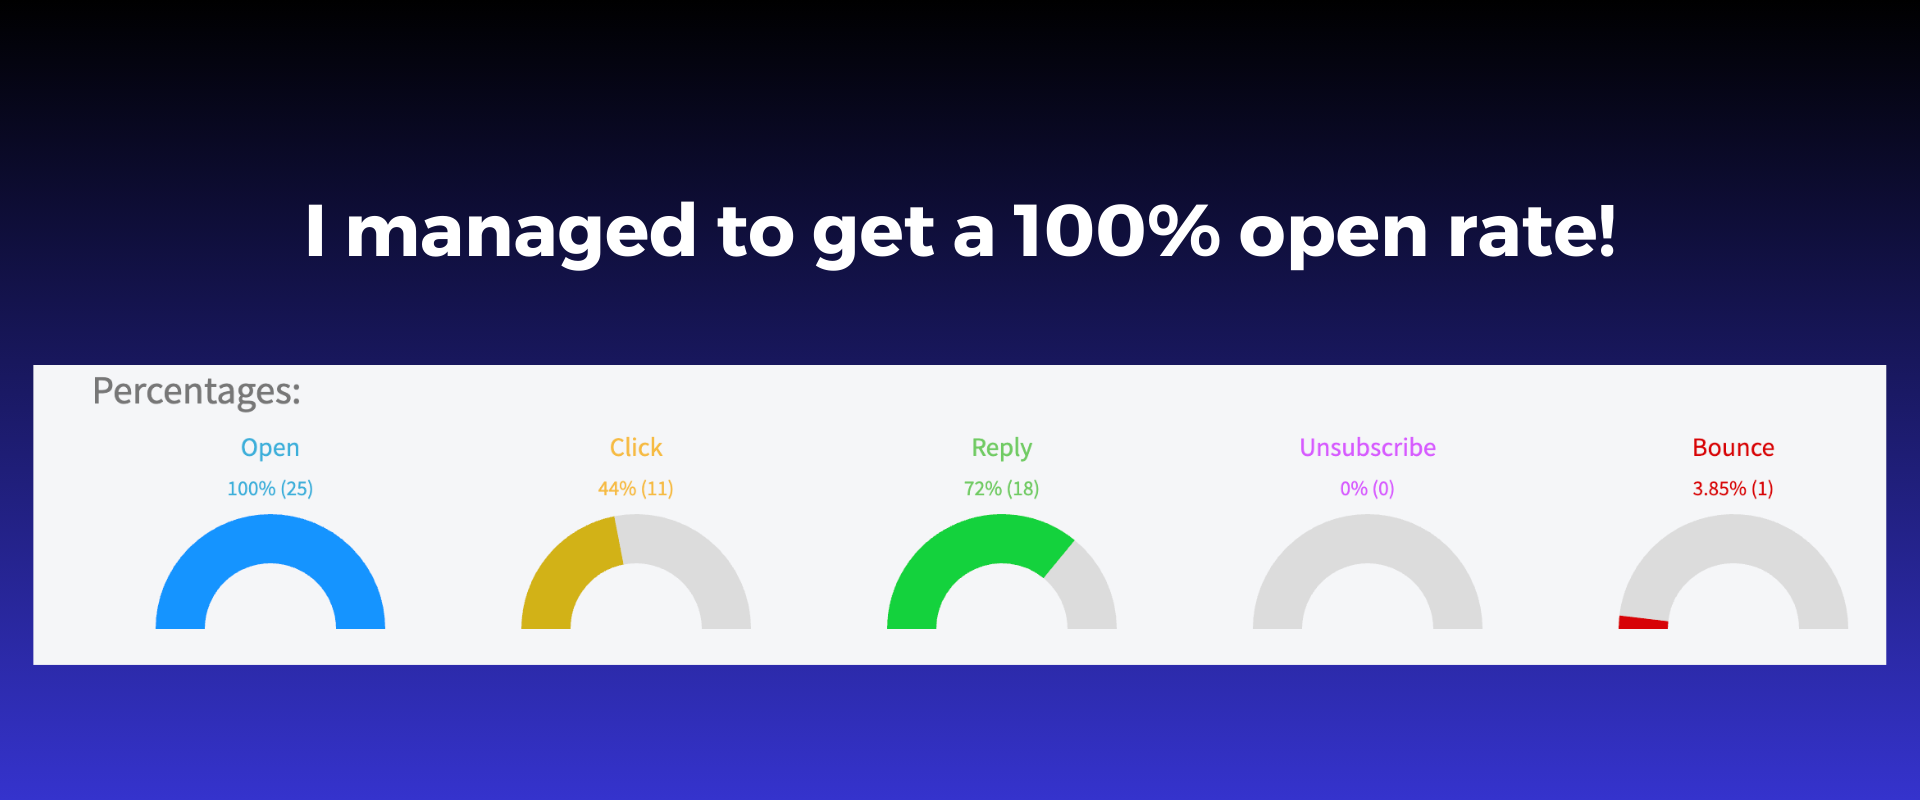 Graphic showcasing email campaign metrics with a 100% open rate achievement.